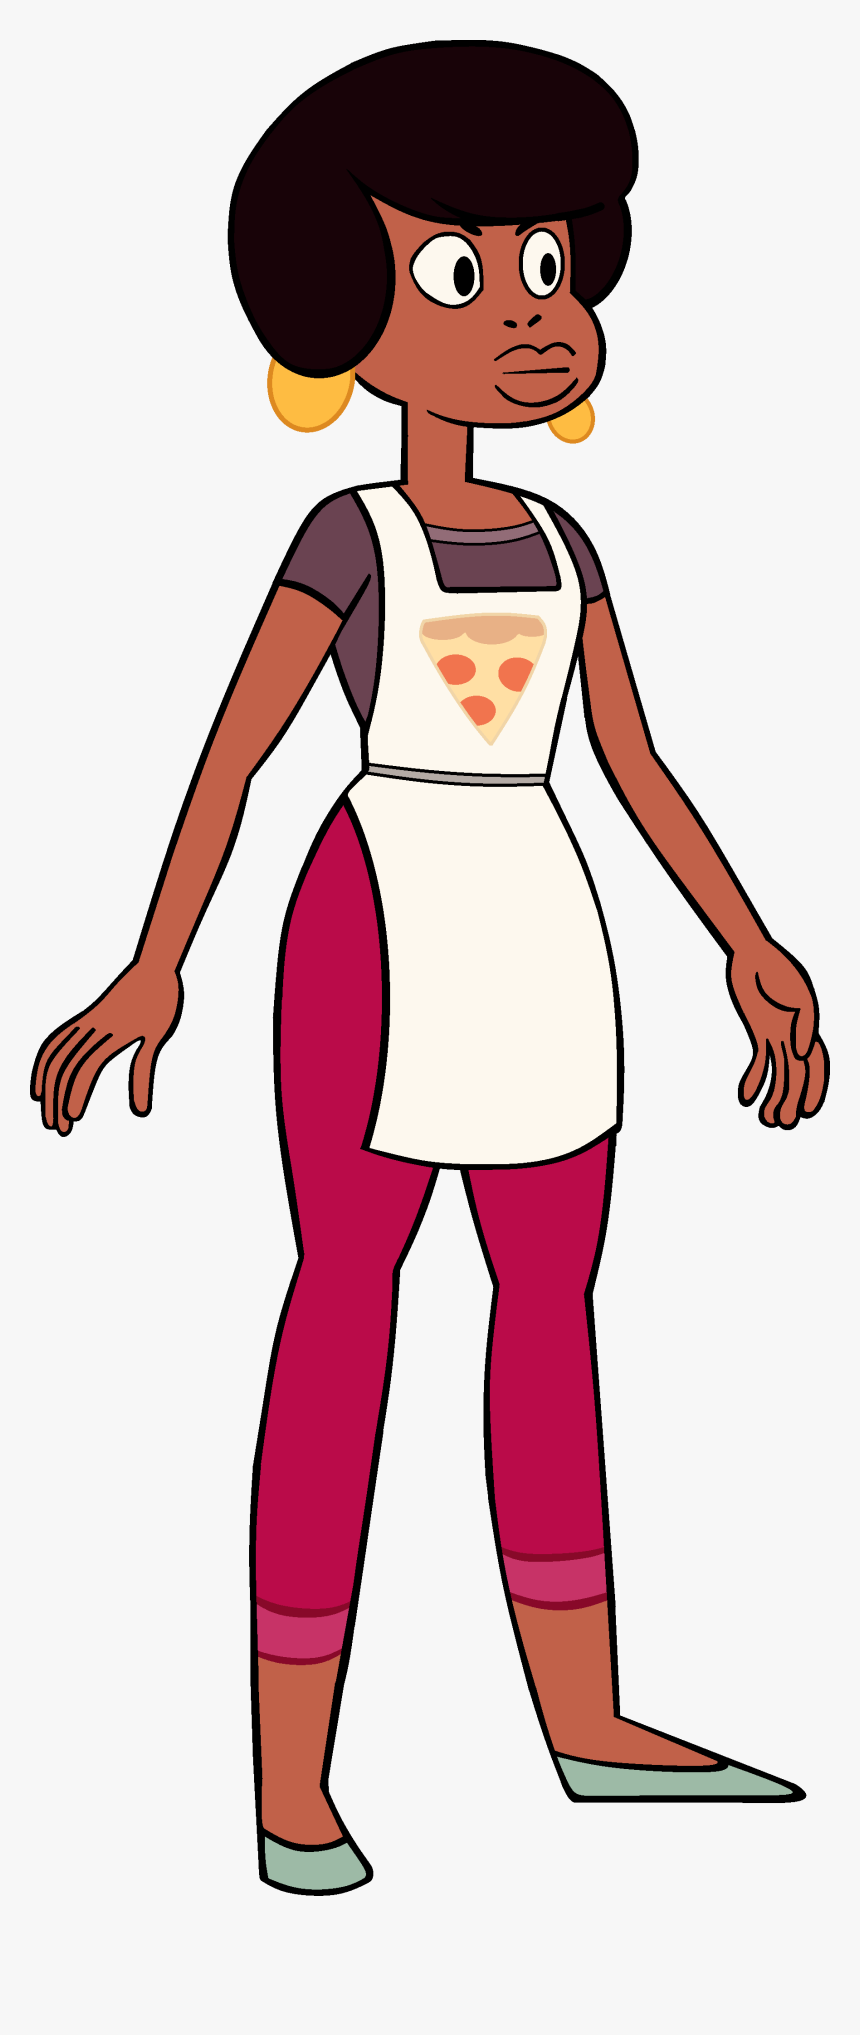 Transparent Kiki"s Delivery Service Png - Steven Universe Characters, Png Download, Free Download